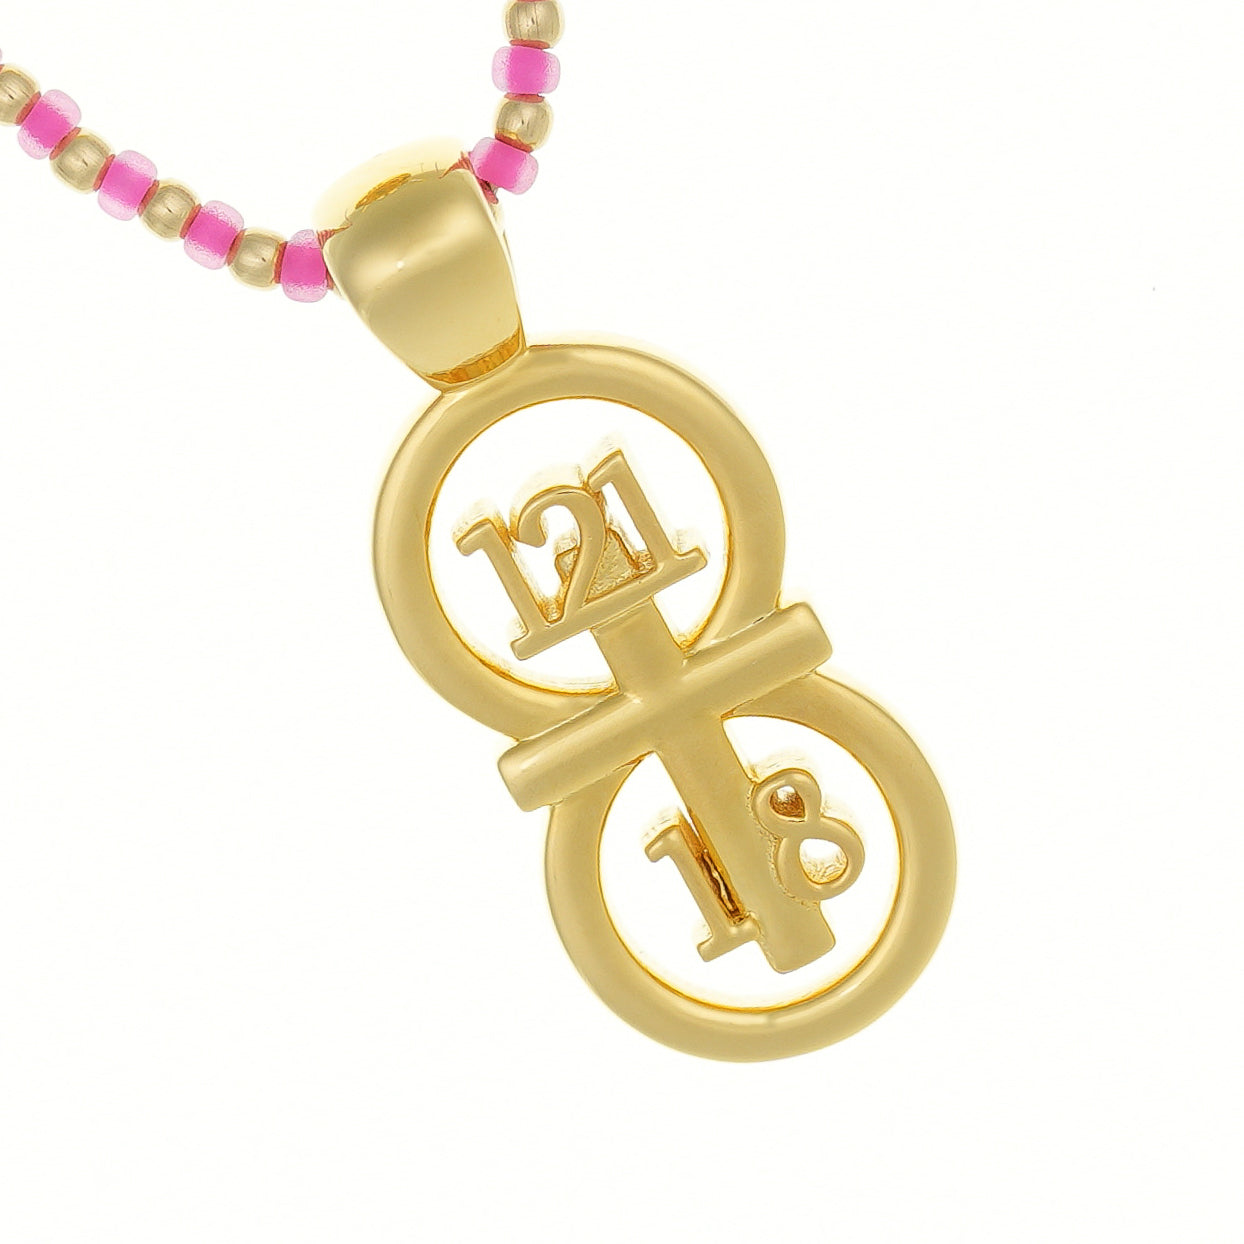 Gold small PSALM 121:1-8 pendant displayed on a white background with a pink custom hand beaded necklace. The RIYAN 29 and 11® pendant has the numbers 121, 1, and 8 intertwined with the cross to represent Psalm 121:1-8 with the chapter word "Psalm" inscribed on the back.